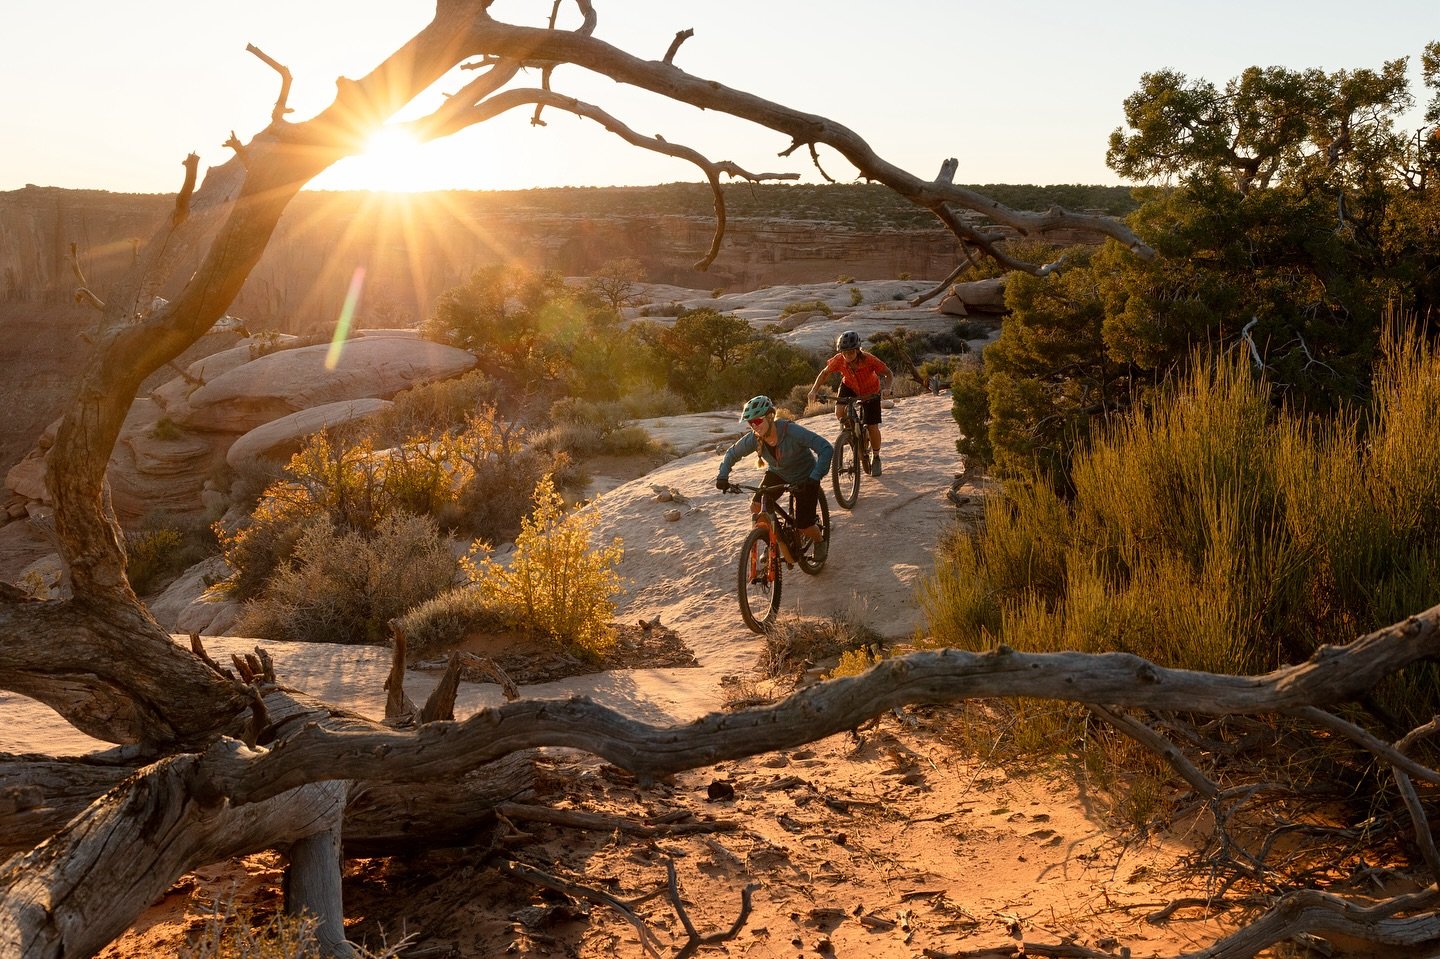 Springtime for our crew means it&rsquo;s time to migrate to the Utah desert. Our Desert Skills MTB Retreat kicks off this week. Brown pow, slickrock, and epic sunsets! 🏜️✨

📸: @moab_photographer 

#bikewithfriends #ridetheearth #ridebikesbehappy #u